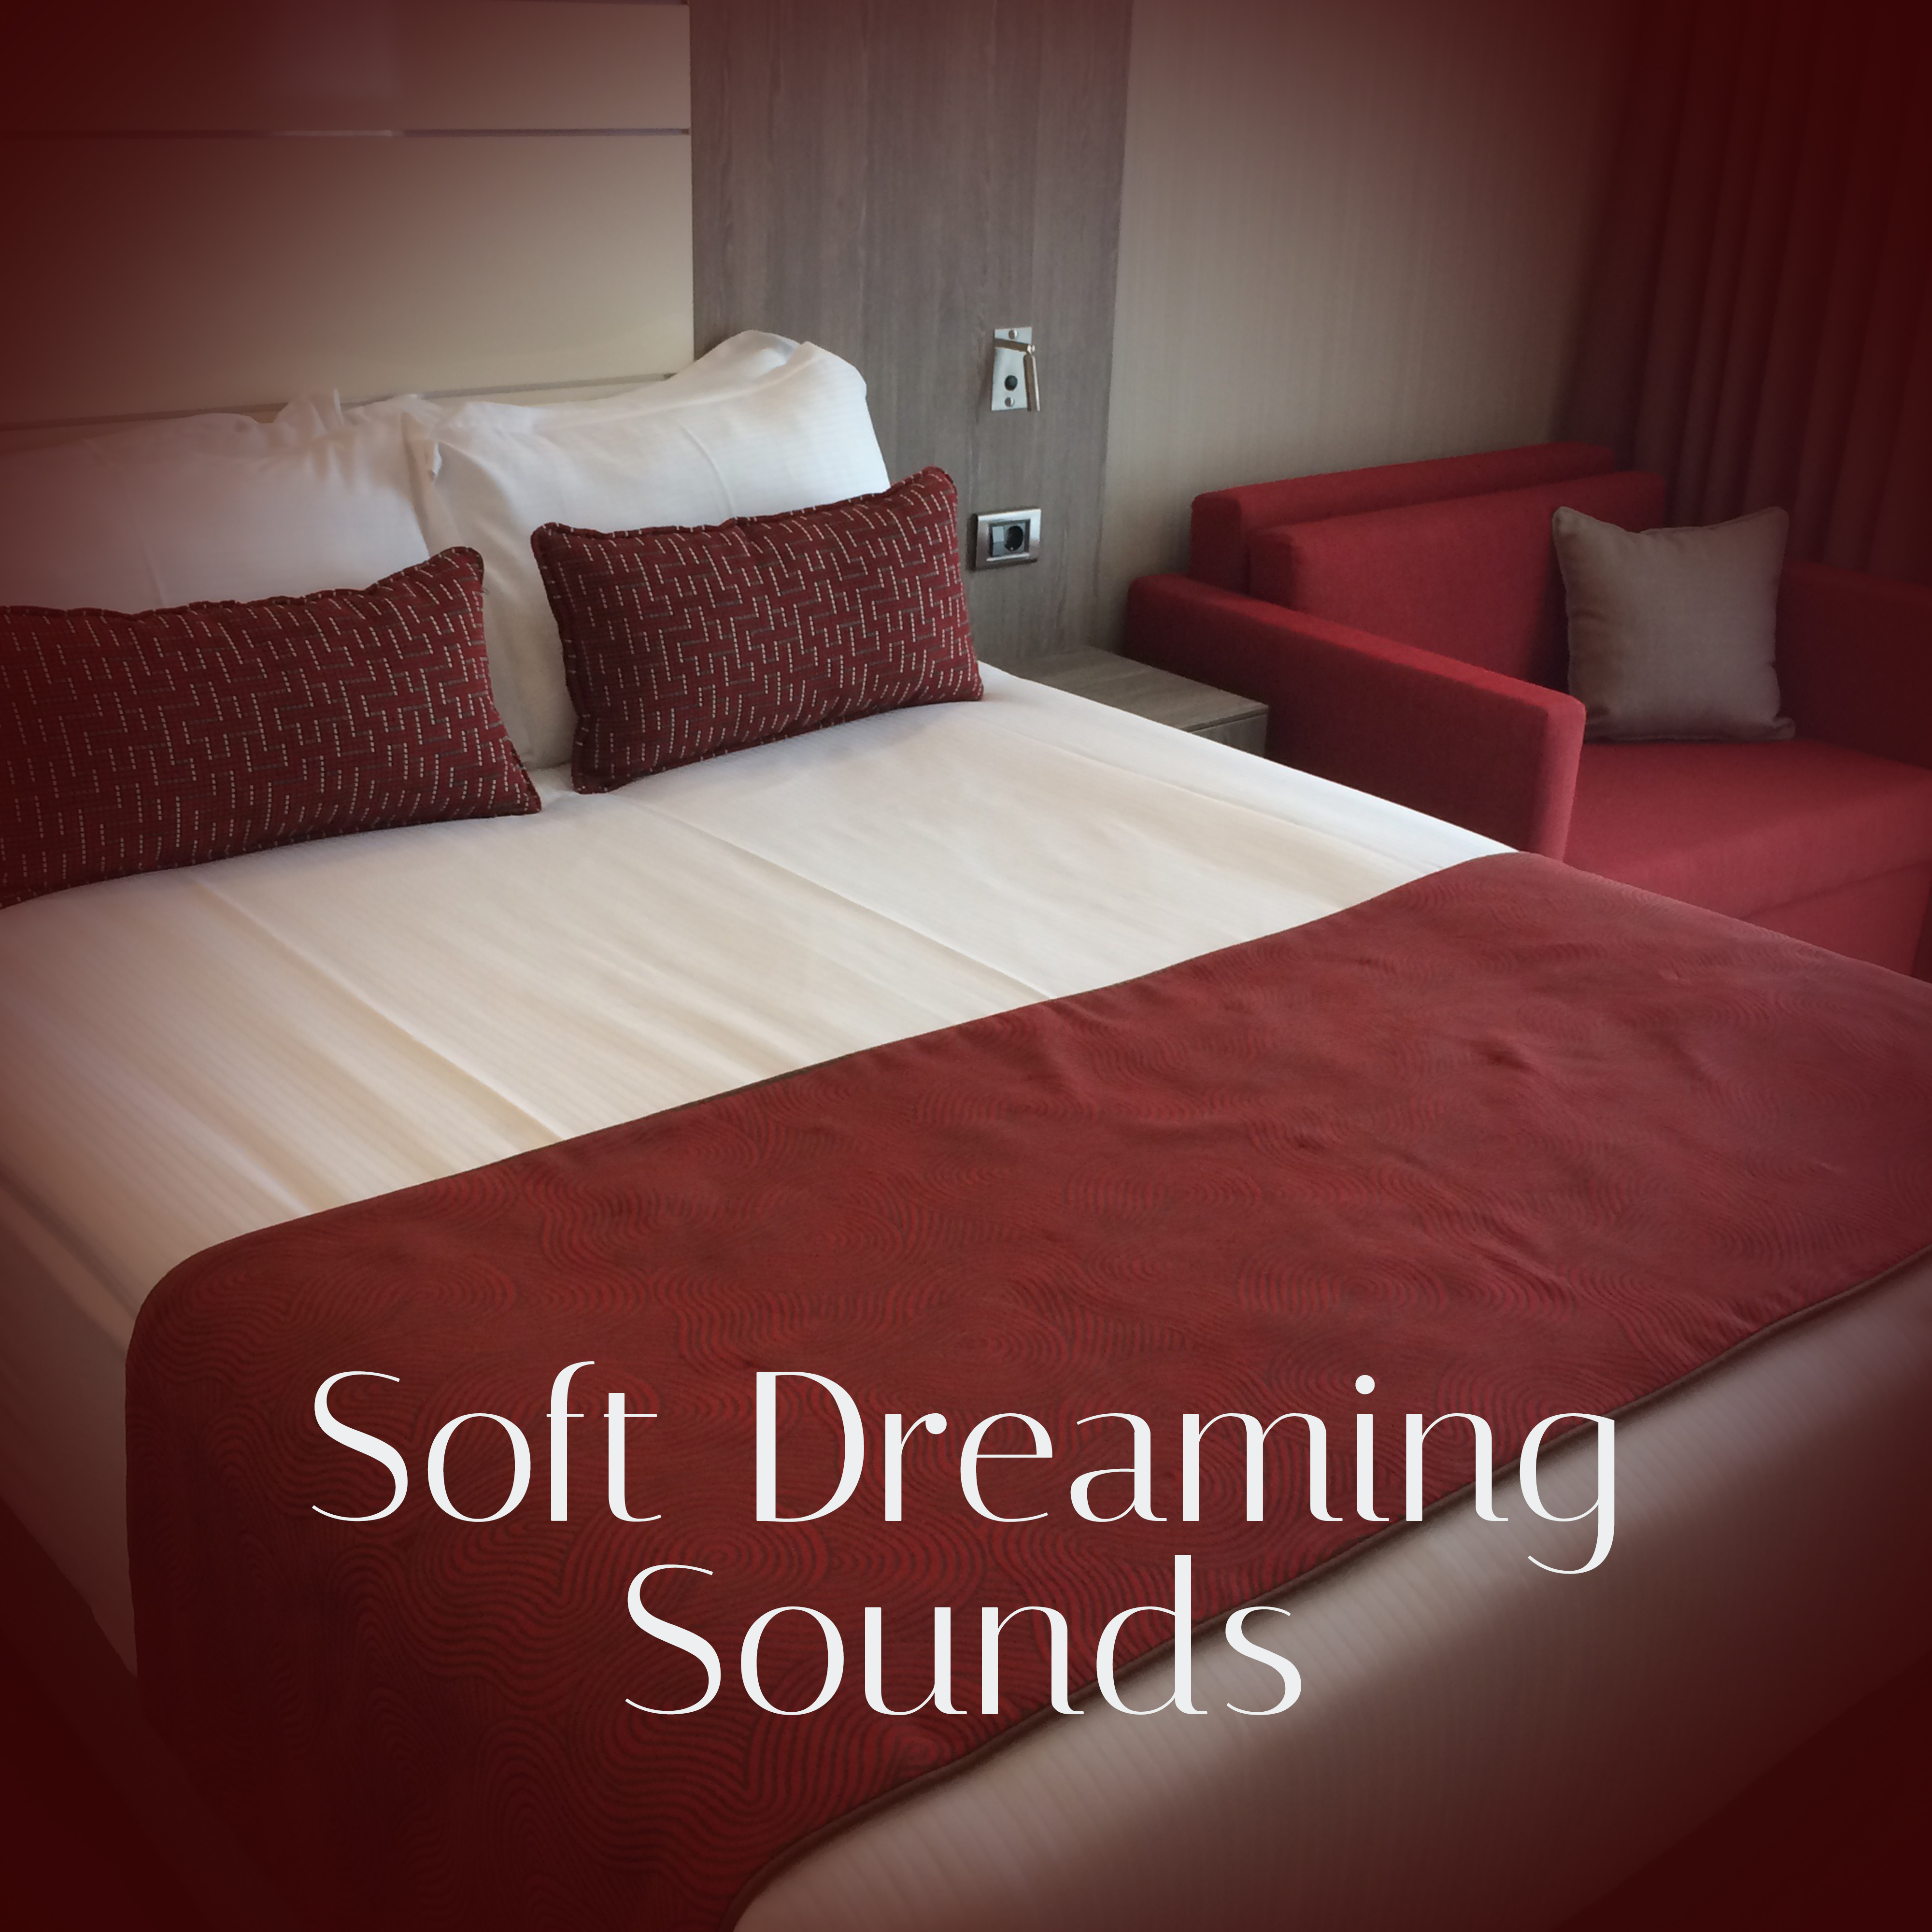 Soft Dreaming Sounds  Easy Listening, Peaceful Waves, Sleep Well, New Age Calmness